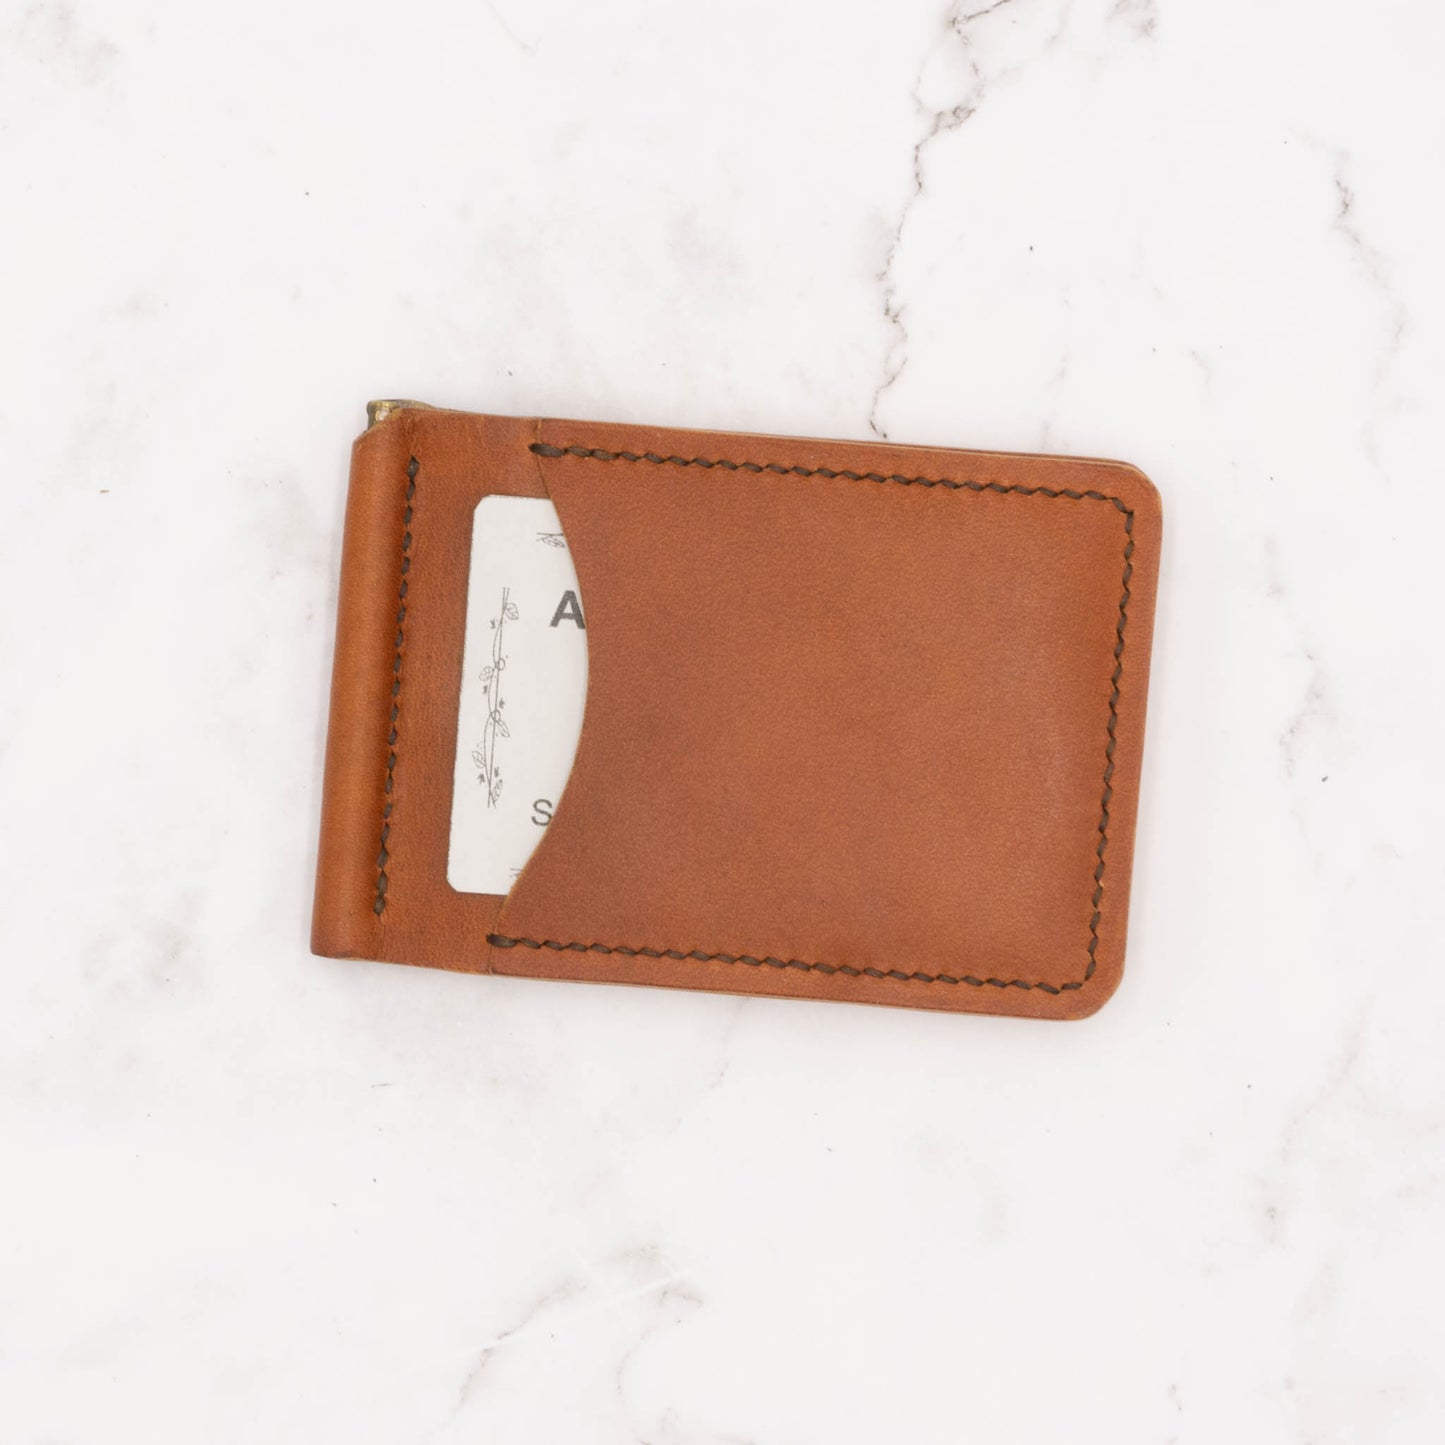 Leather Money Clip Card Holder Wallet - English Tan